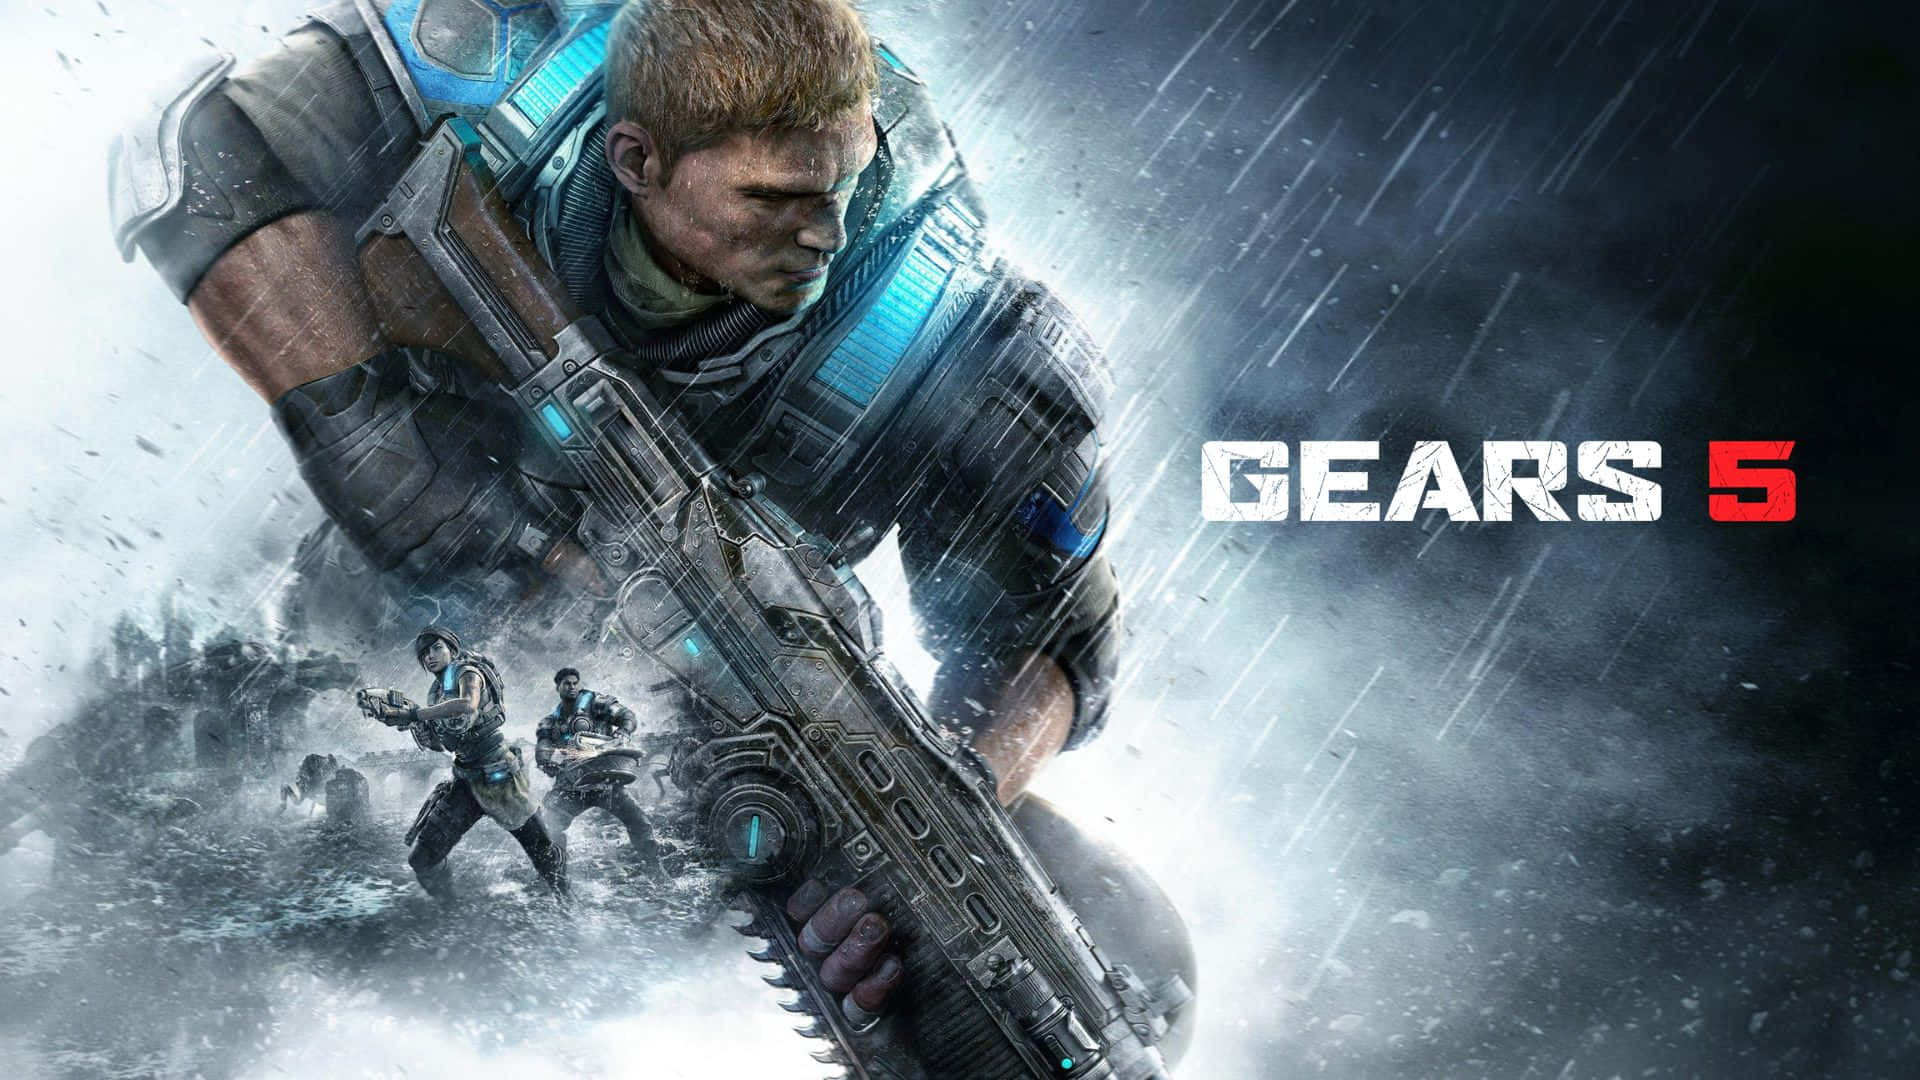 "Get ready to join Delta Squad on their mission for survival in Gears of War 5"